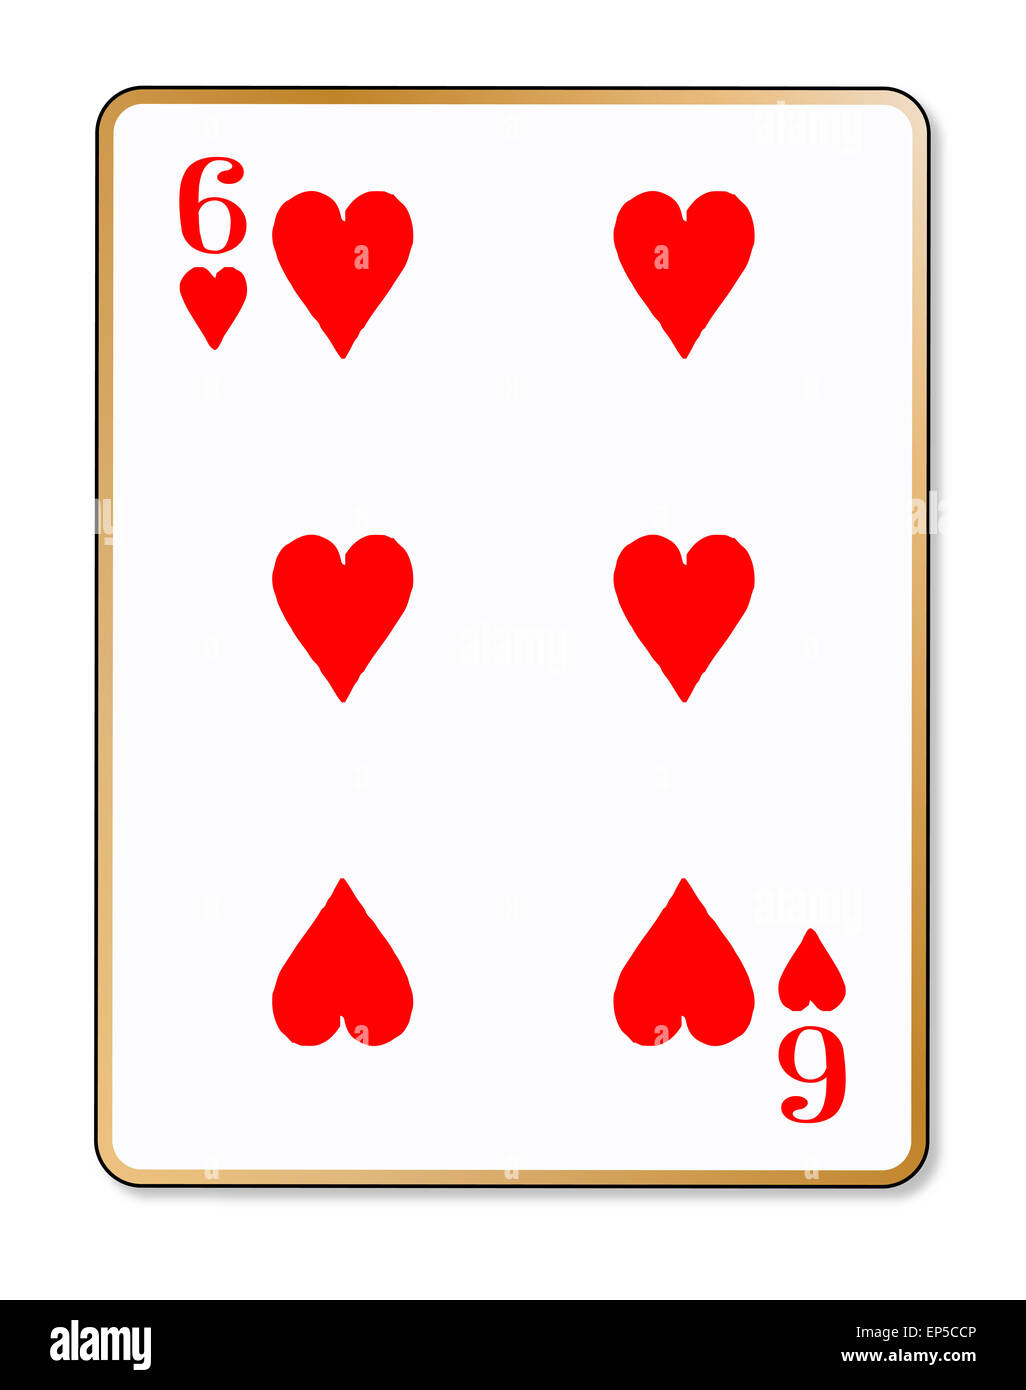 The playing card the Six of hearts over a white background Stock Photo